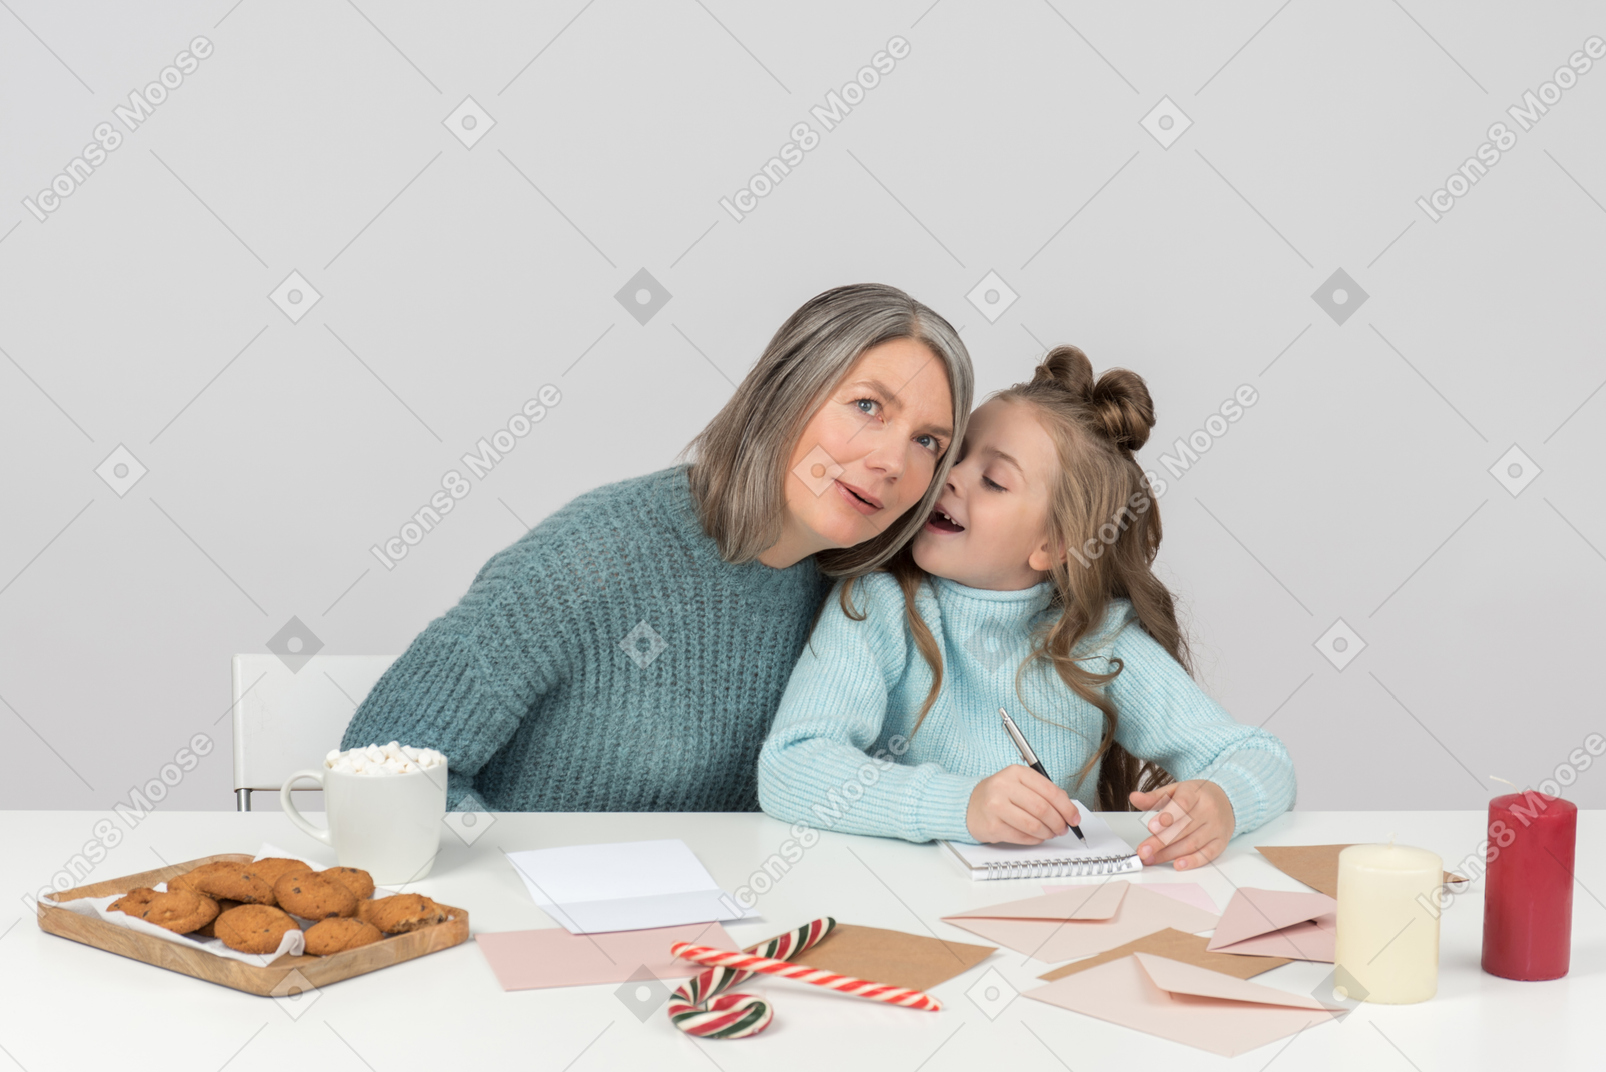 Grandmother and granddaughter writing a letter to santa together